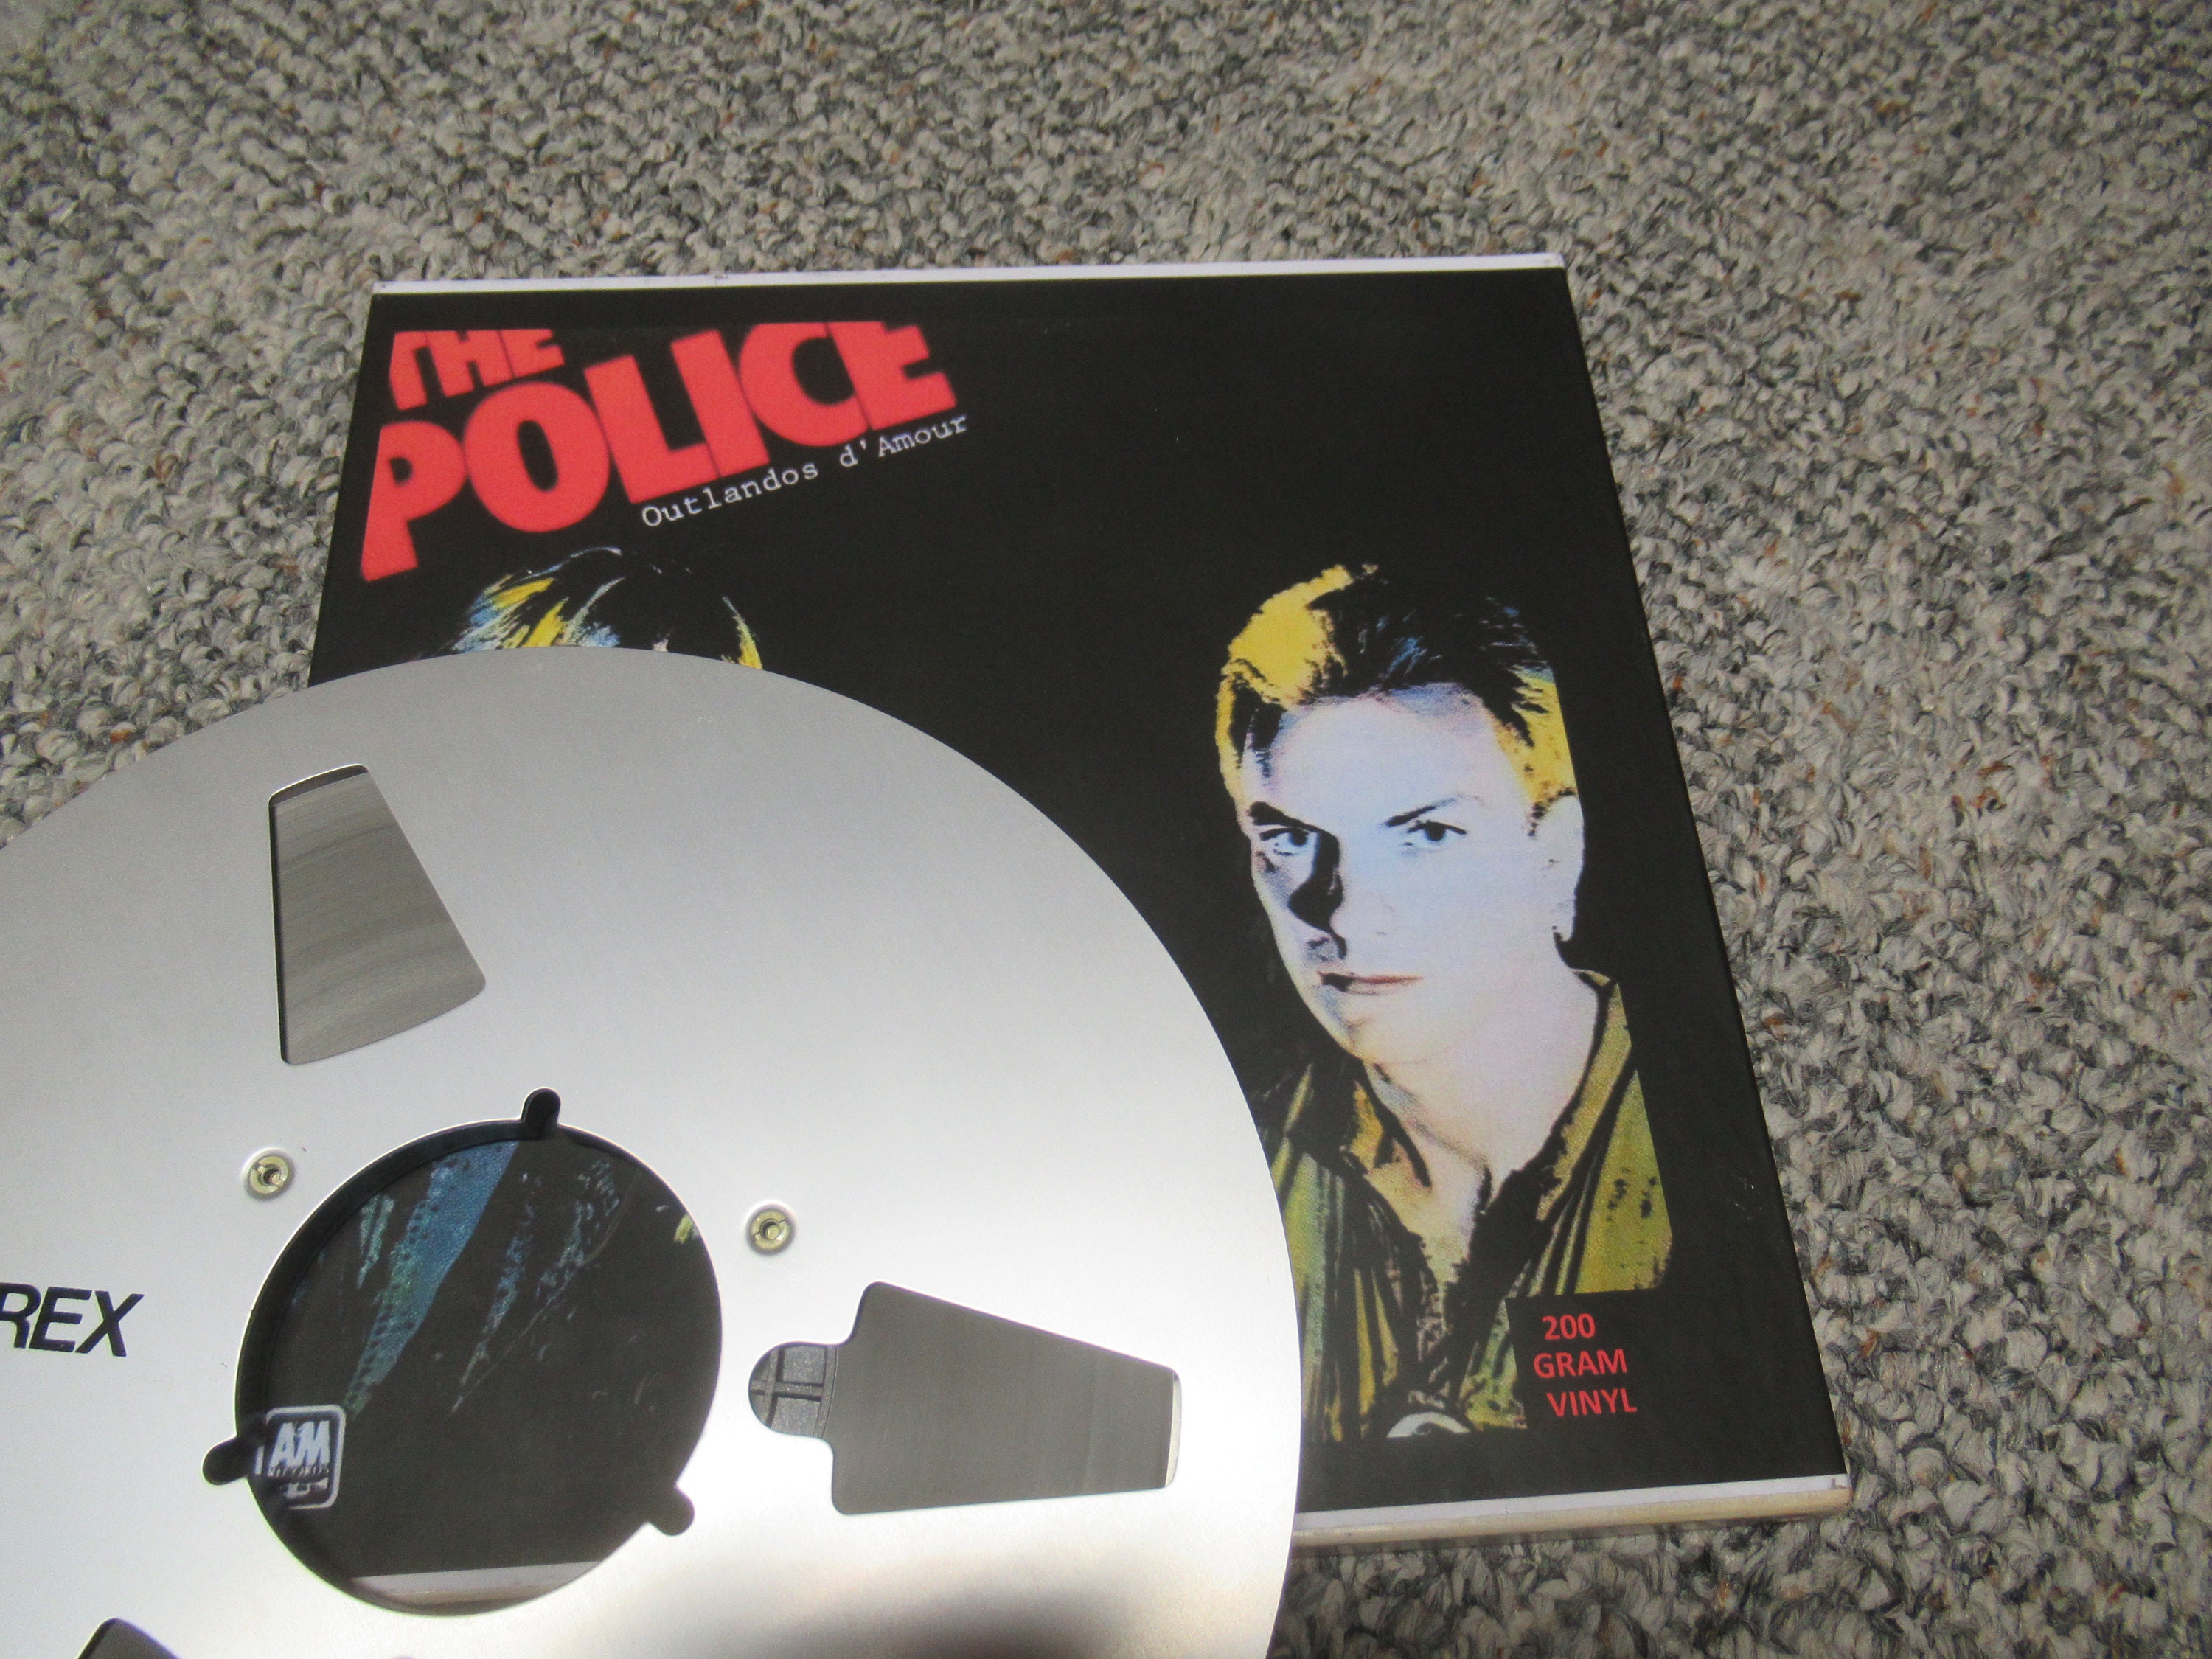 Police Out'landos D'amour 2 Track 15 IPS Reel to Reel Tape -  UK